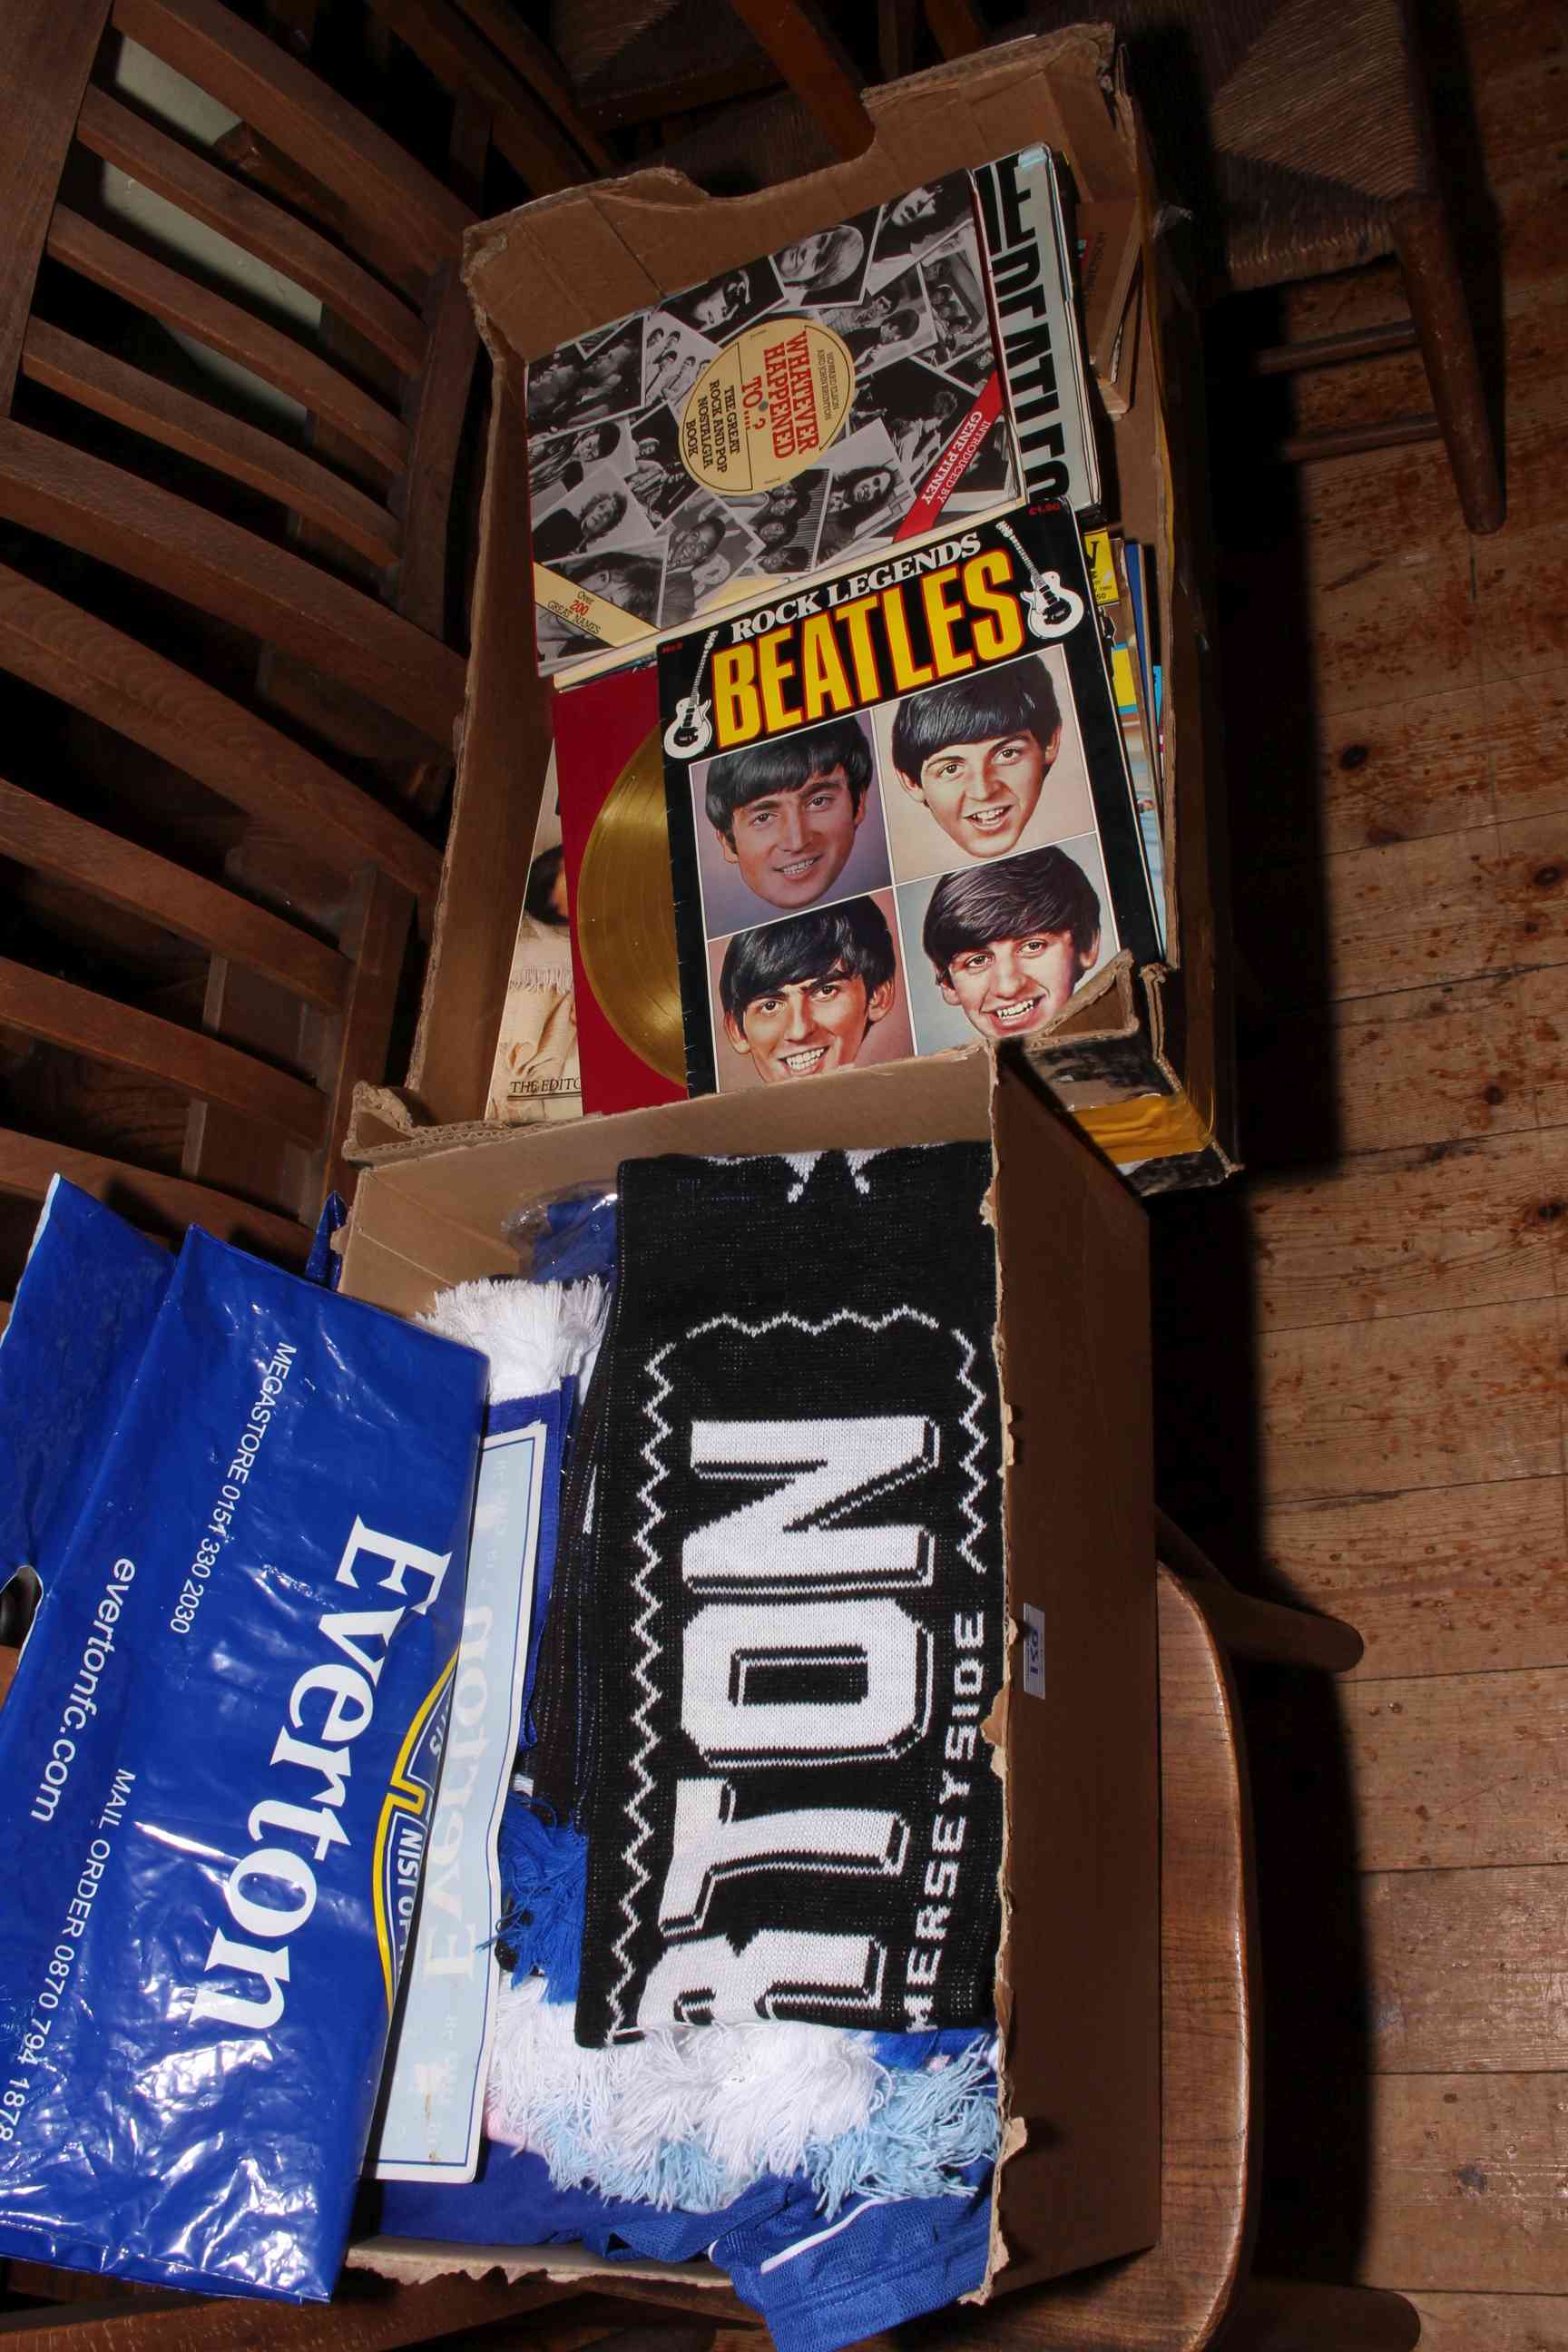 Beatles magazines and books together with Everton football shirts and scarves.